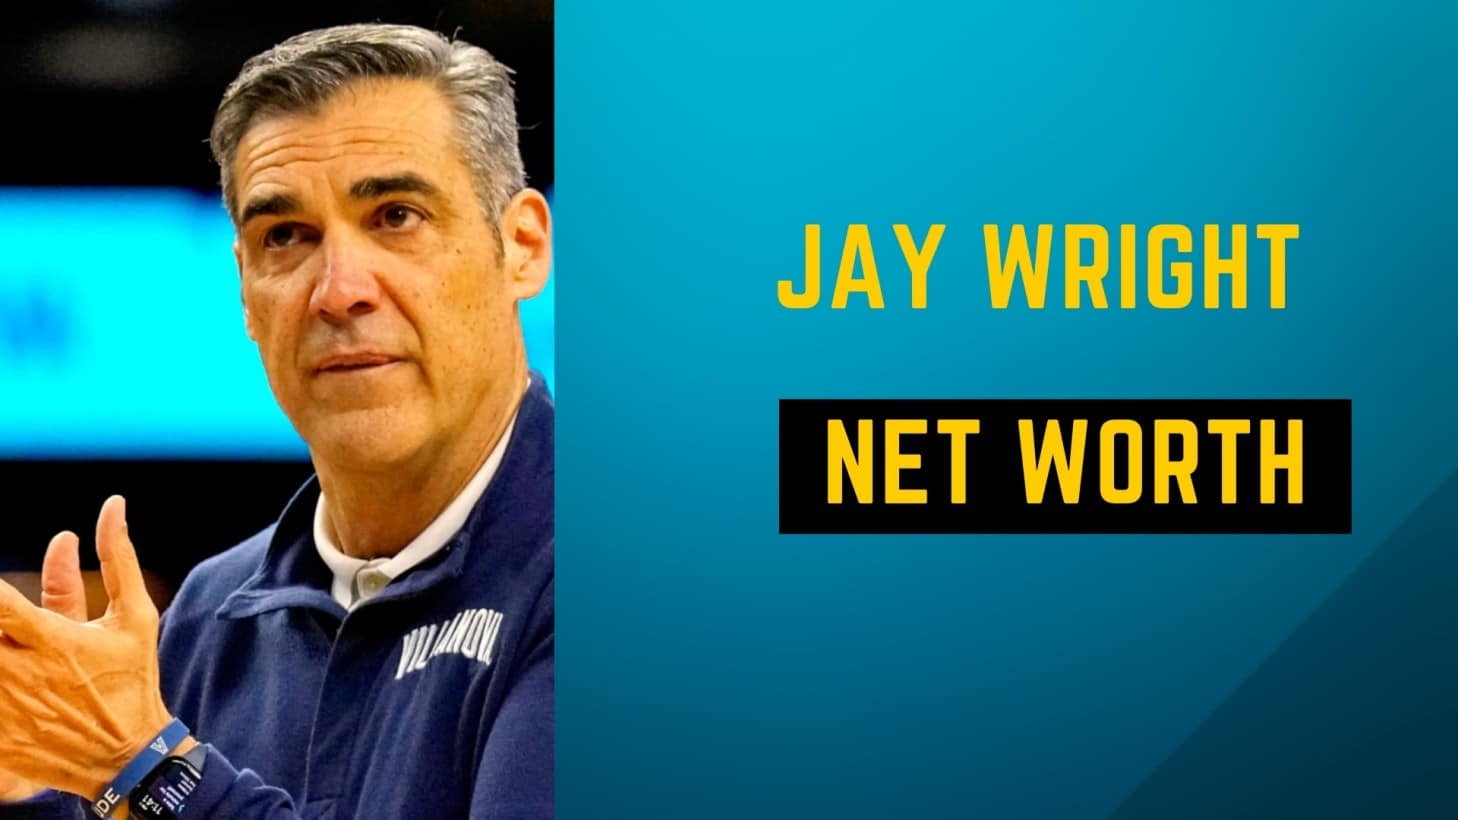 Jay Wright Net Worth 2022: Early Life, Career And Everything To Know About Basketball Coach Jay Wright